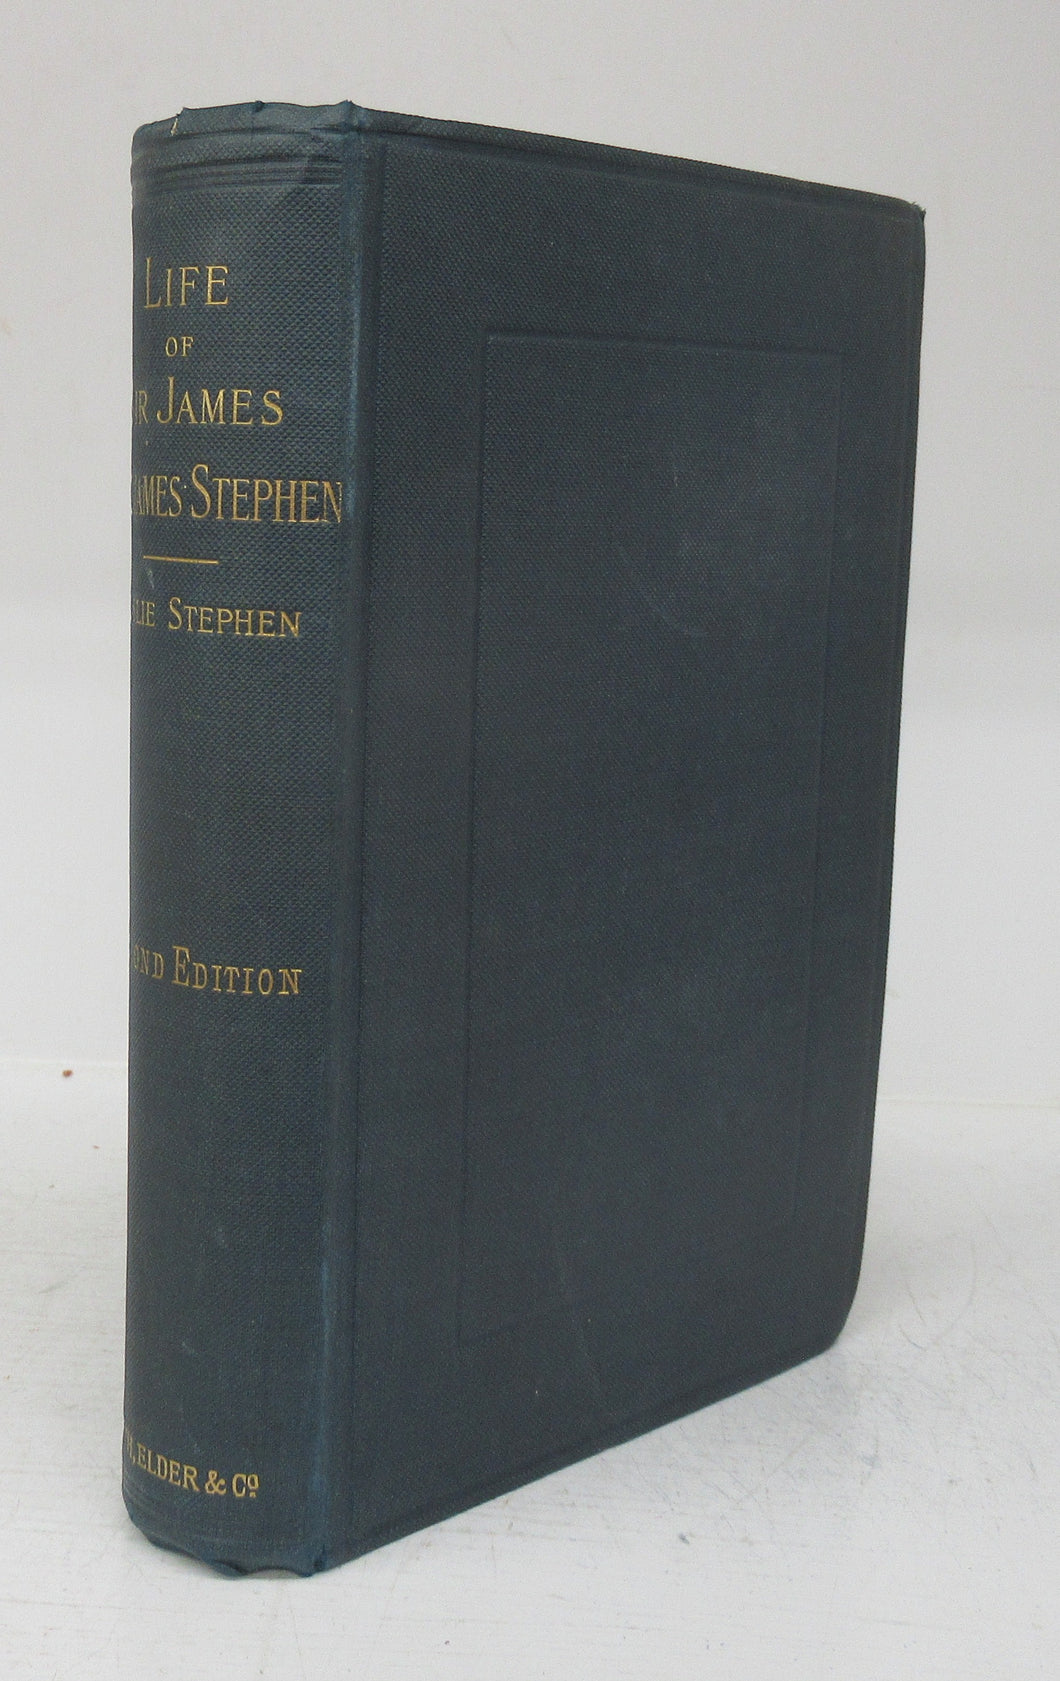 The Life of Sir James Fitzjames Stephen, Bart., K.C.S.I. A Judge of the High Court of Justice